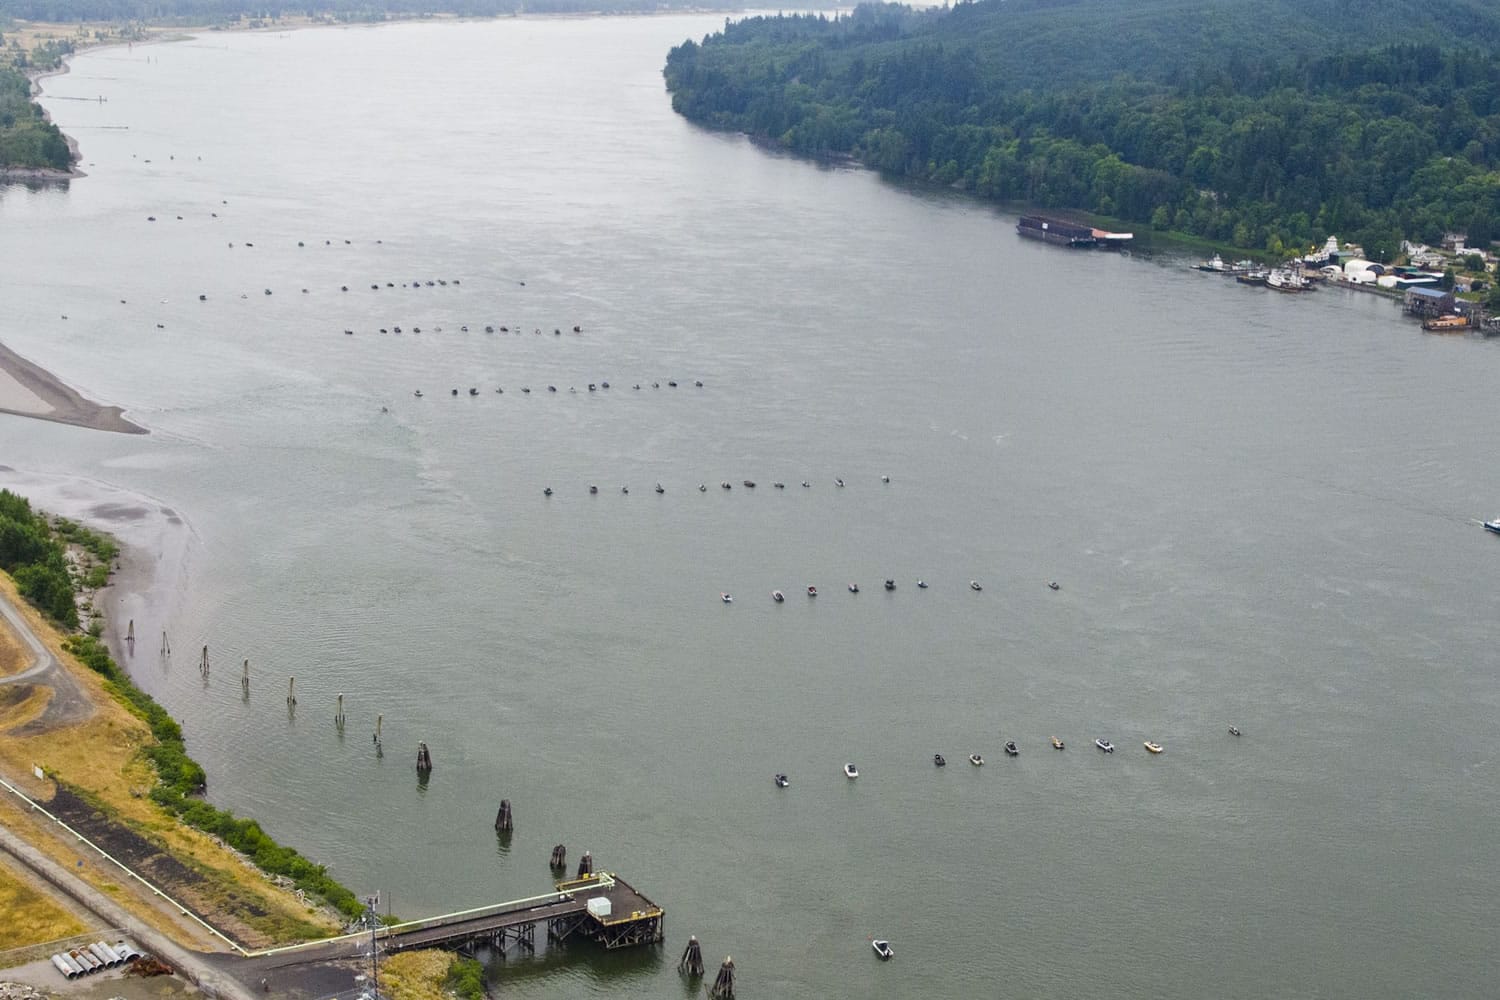 About 80 boats were anchored in the Columbia just downstream of the Cowlitz River mouth fishing for salmon and steelhead on Saturday.